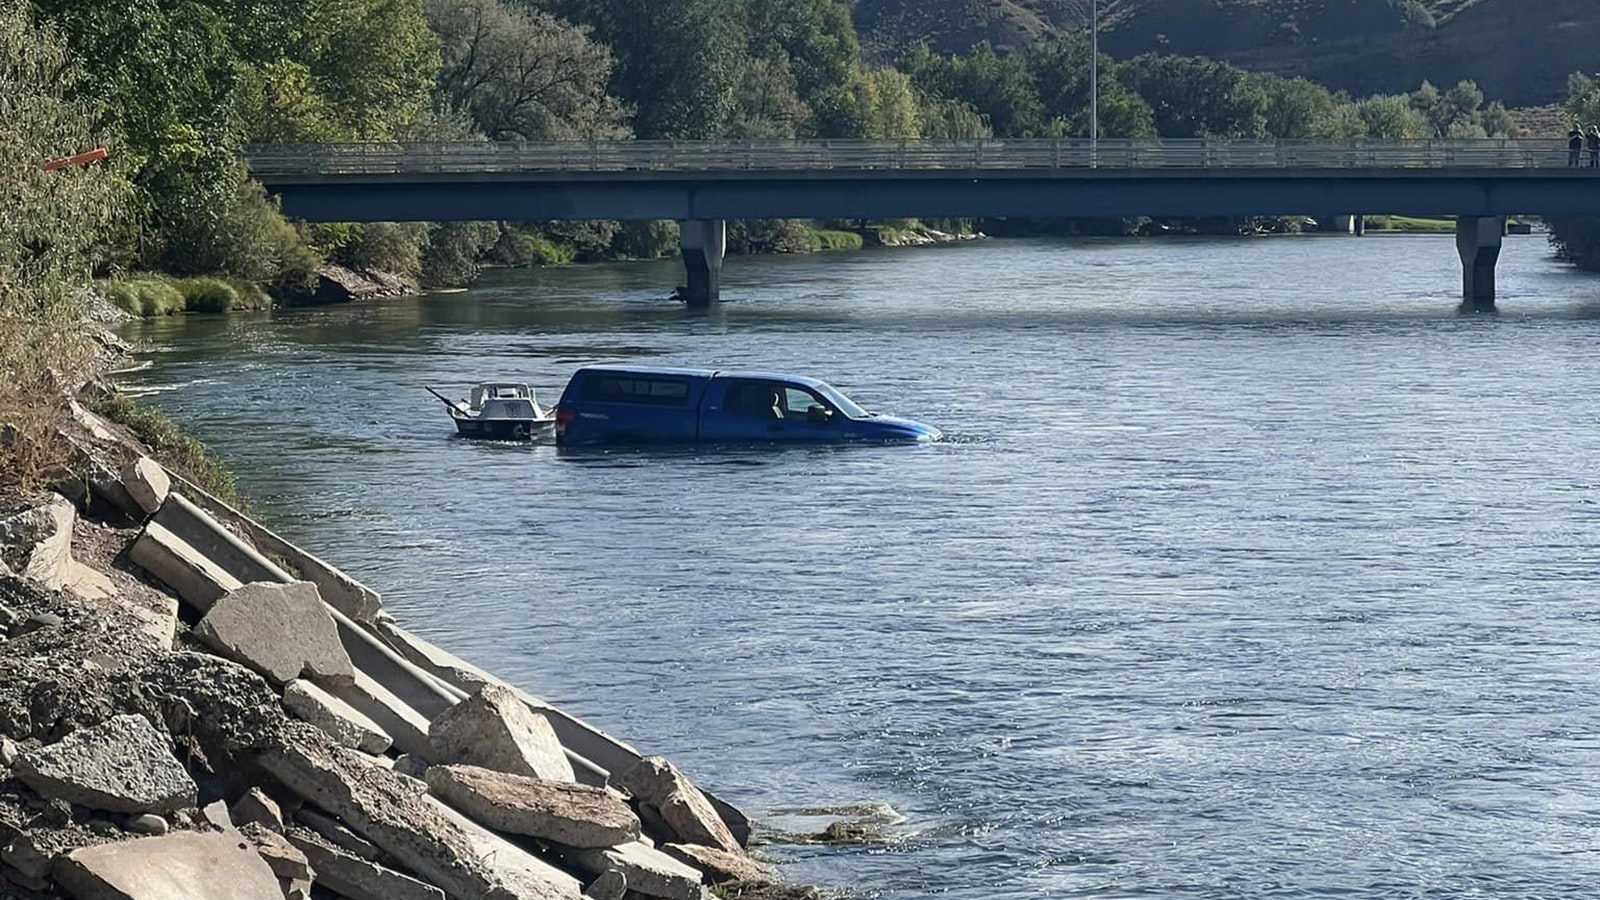 Truck and boat in river 3 10 5 23